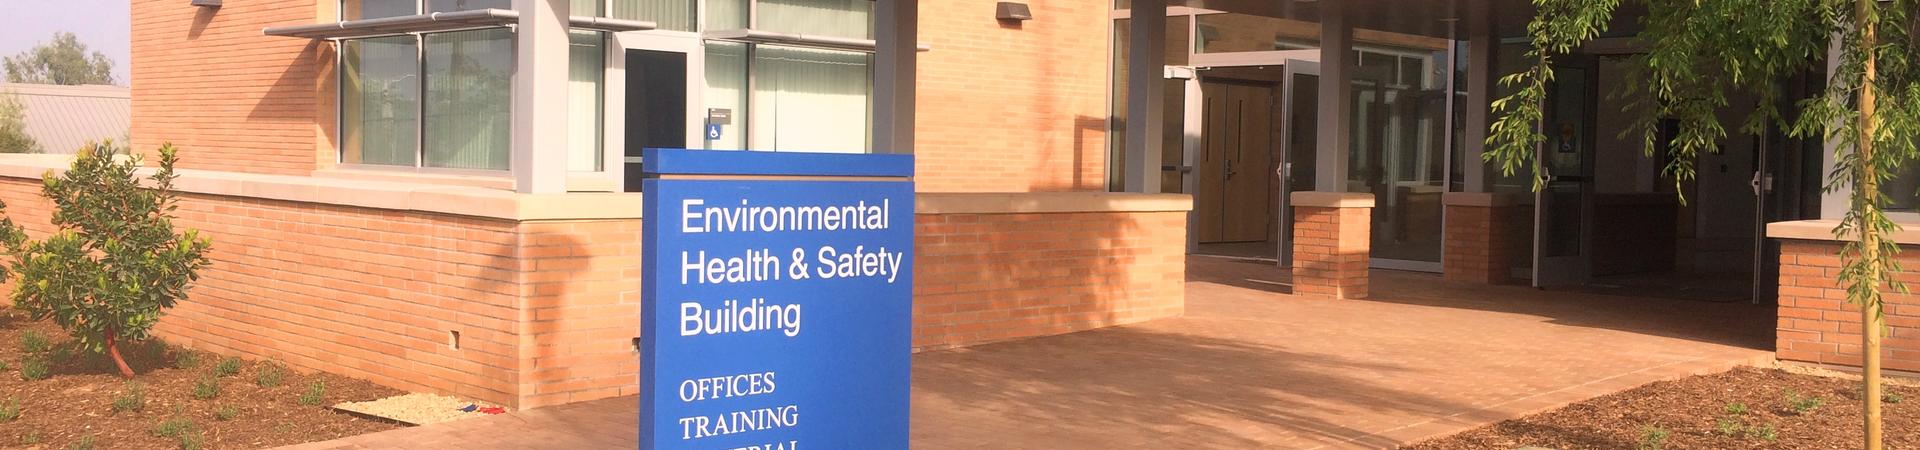 Environmental Health and Safety Building at UCR